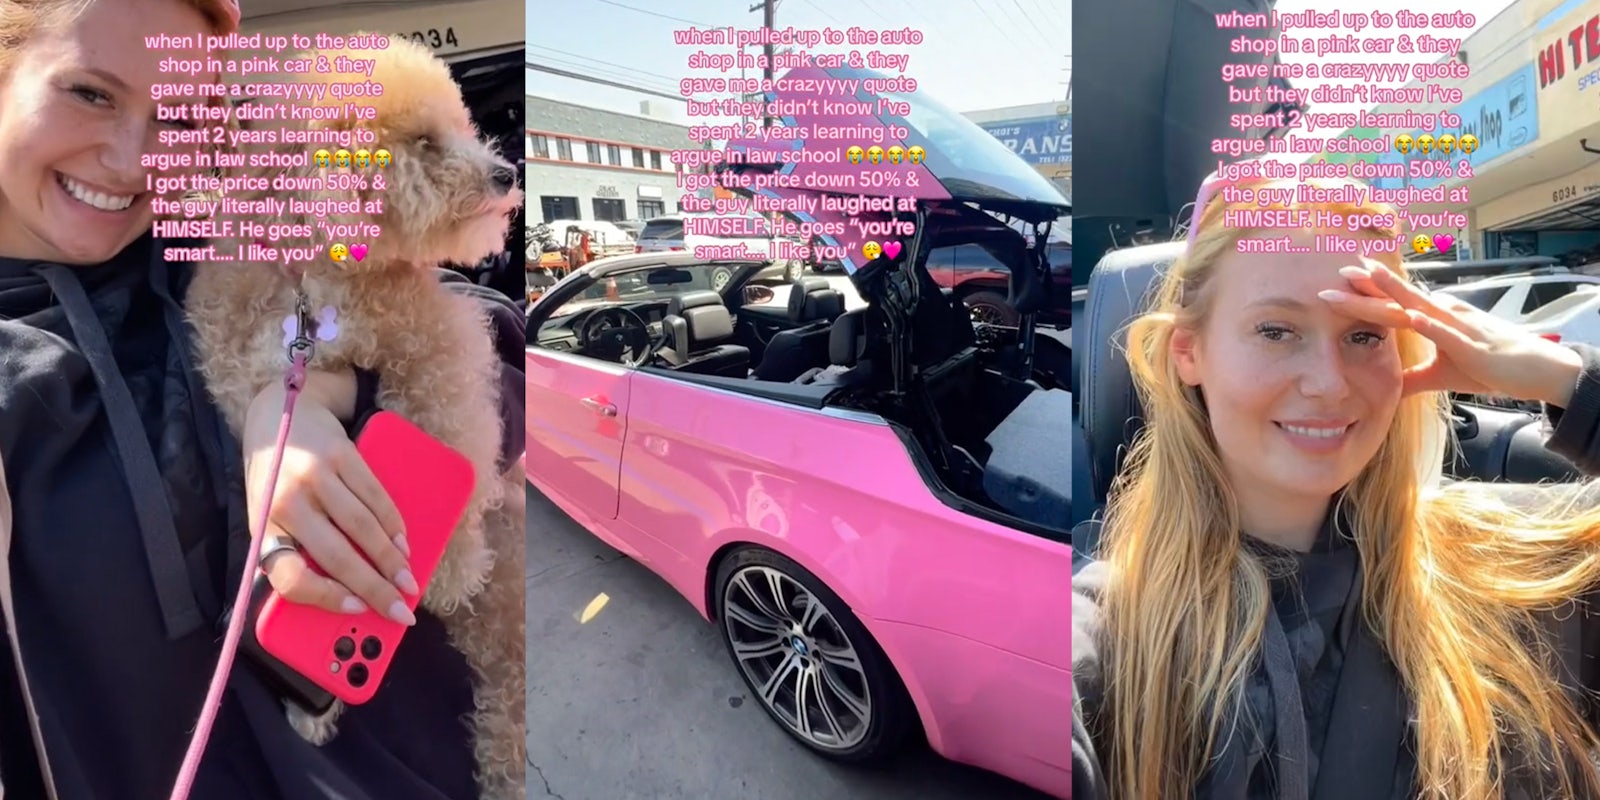 girl shows up in pink car to mechanic. they upcharge her 50%